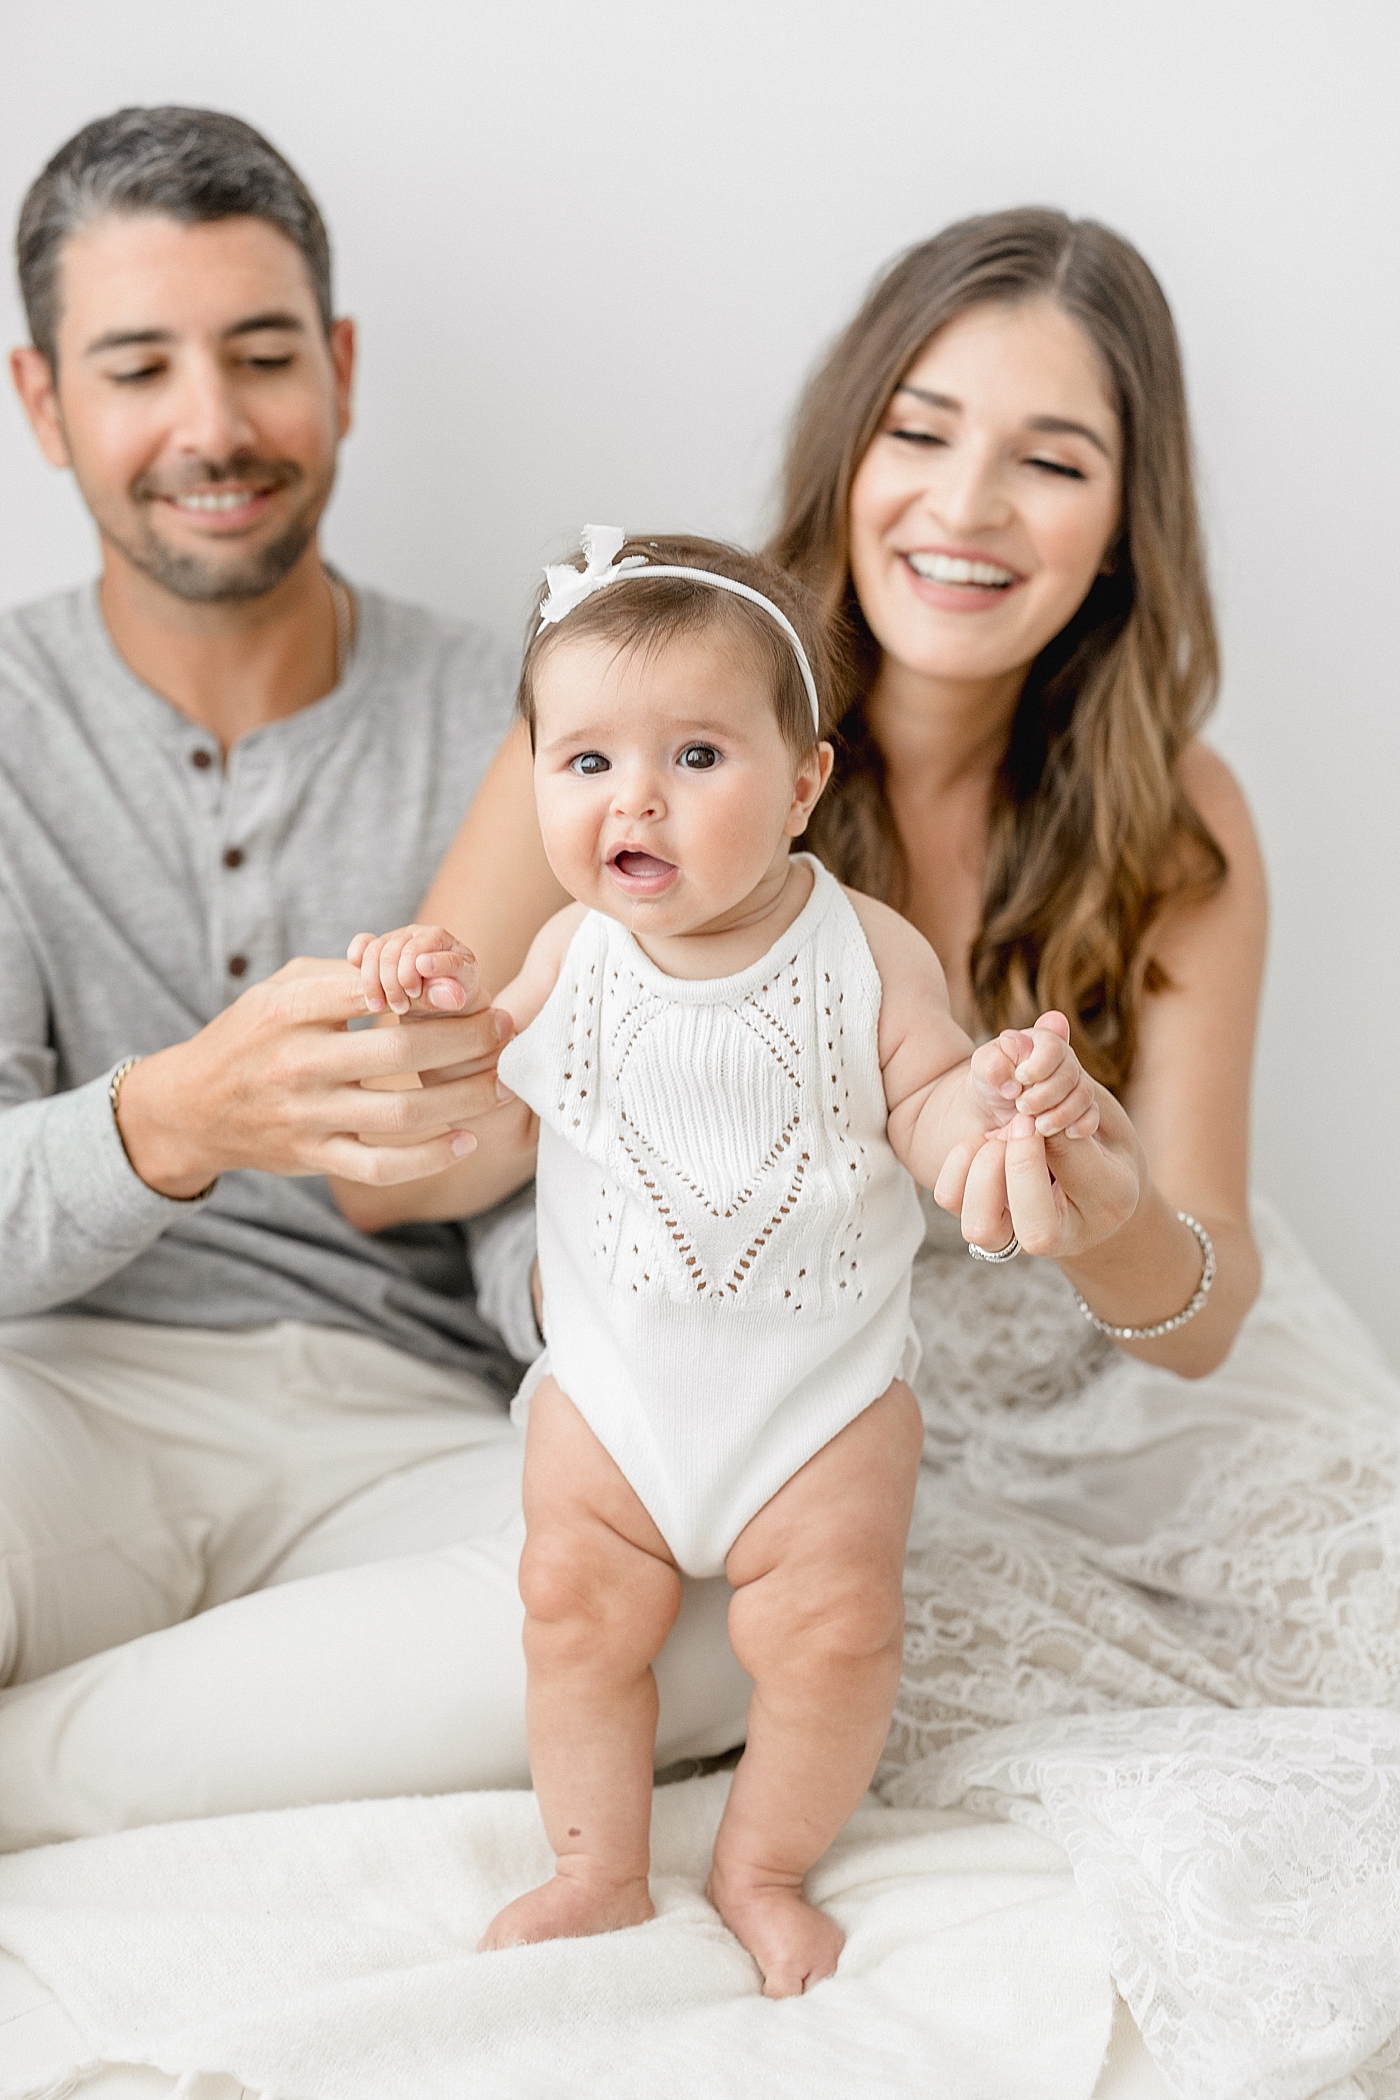 Six month old baby standing with support from Mom and Dad. Photos by Brittany Elise Photography.